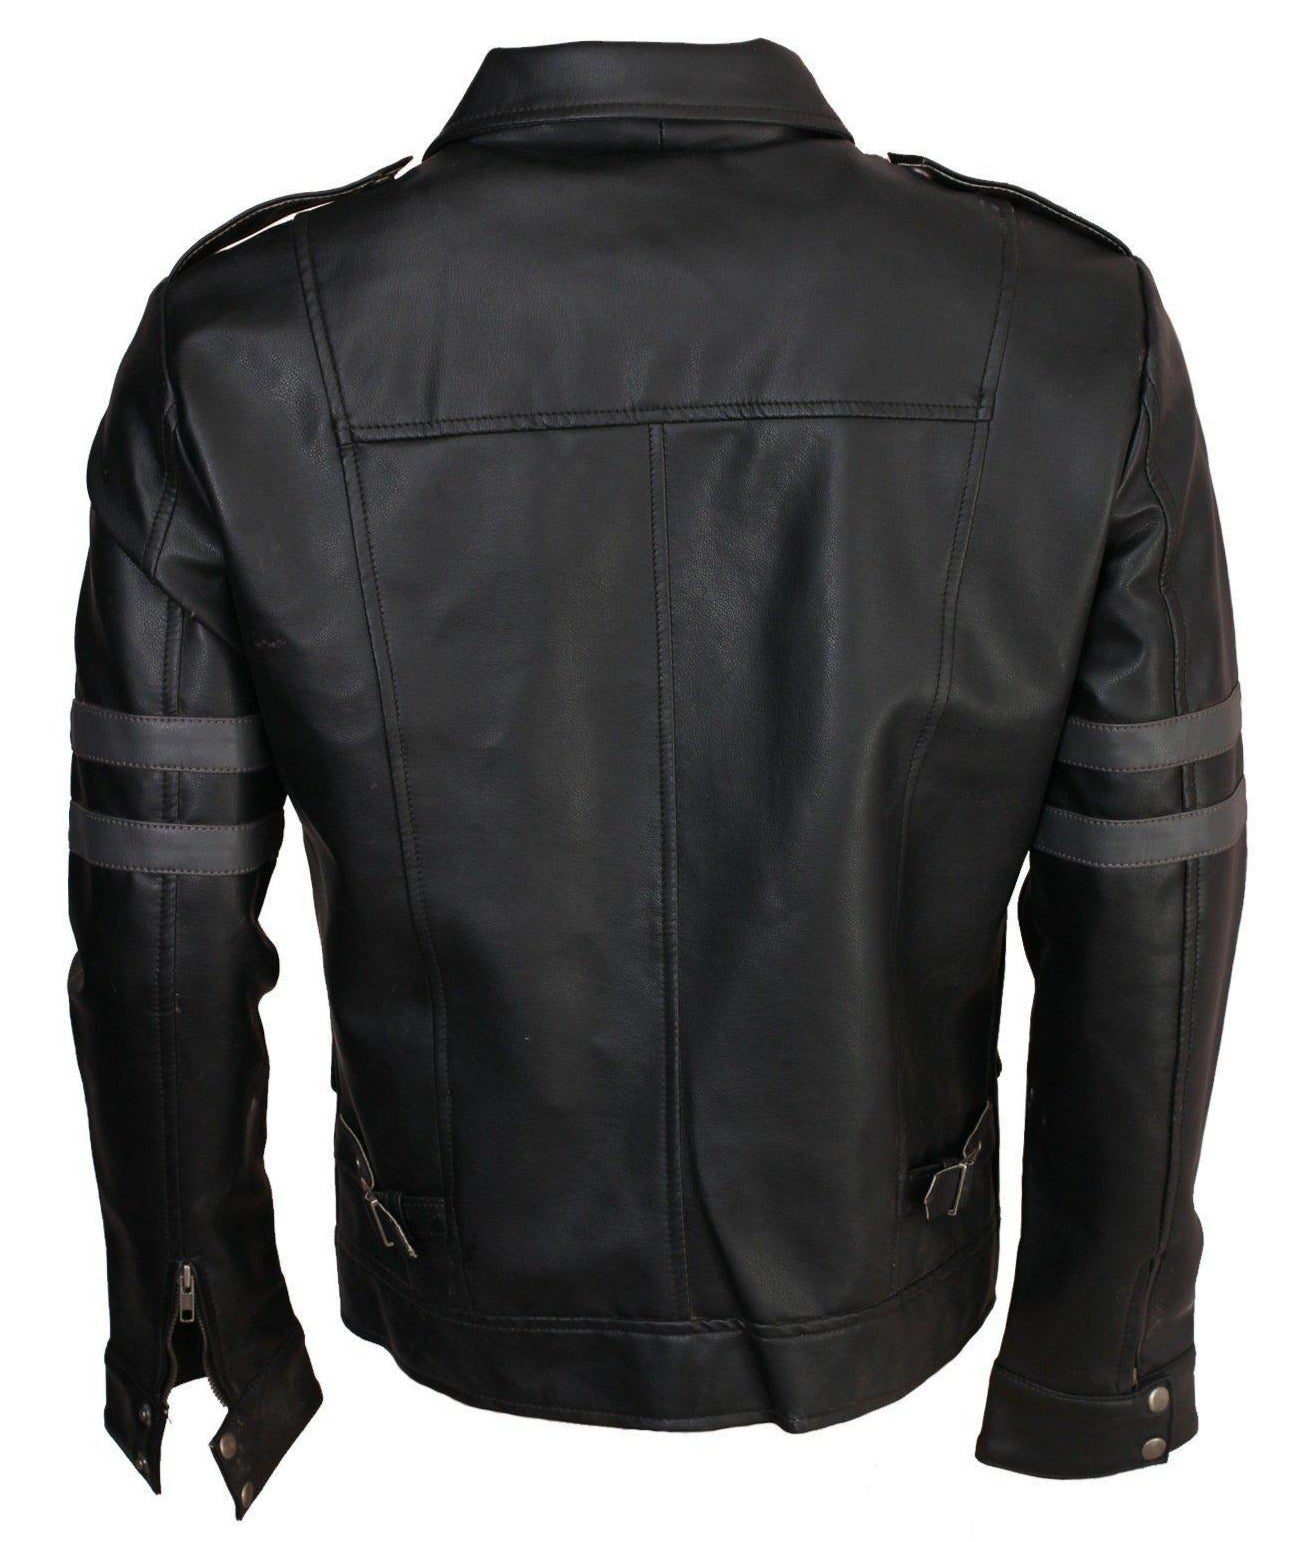 Leon Kennedy Jacket from Resident Evil 